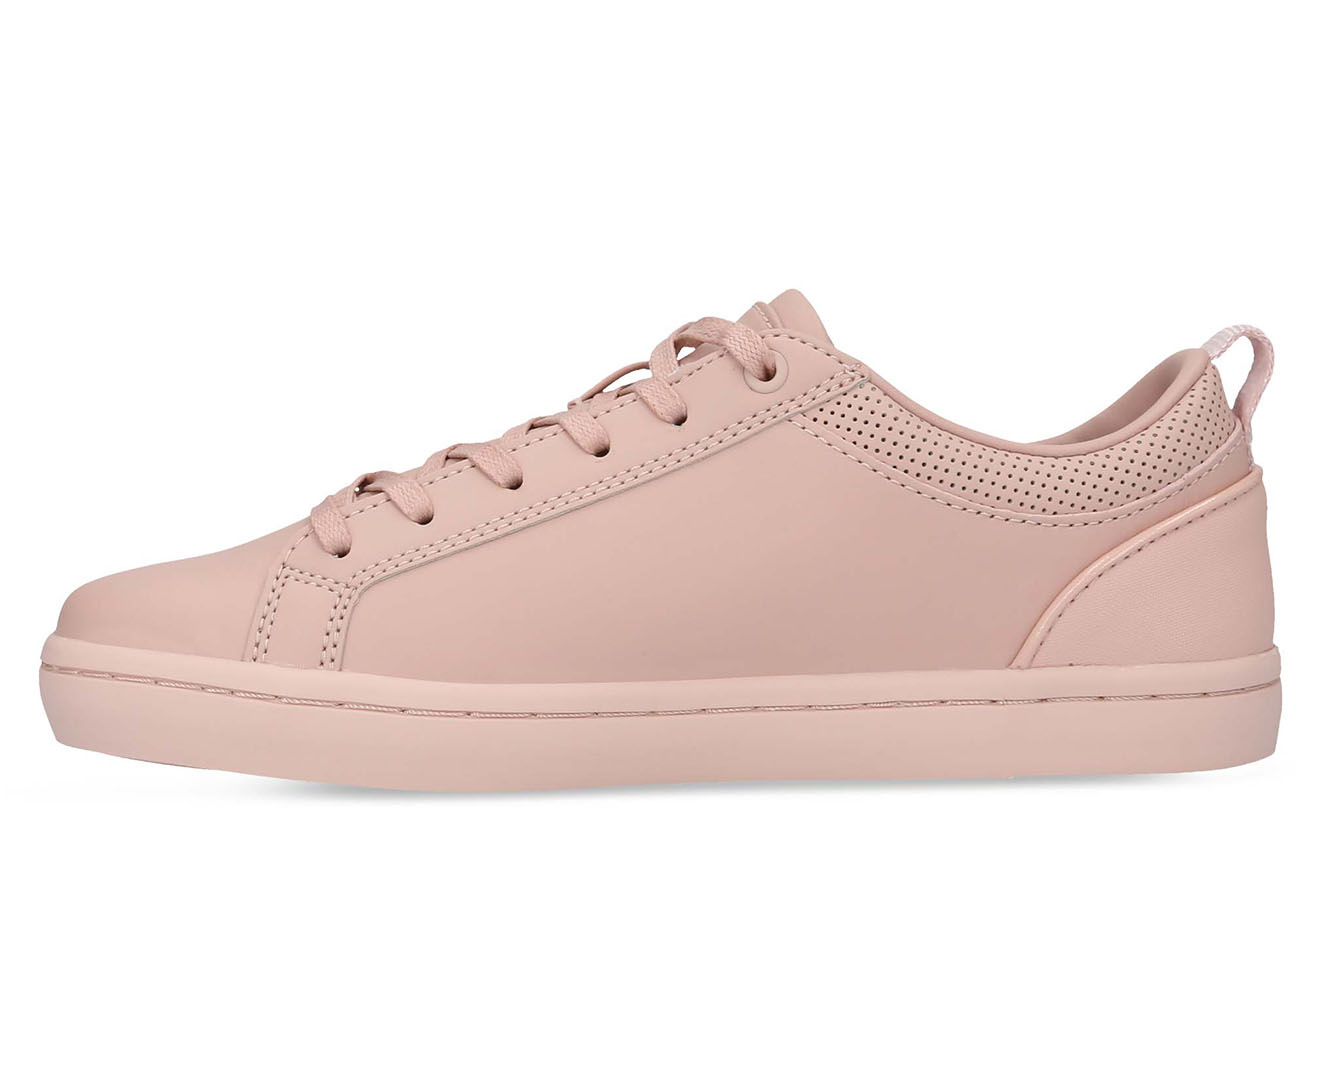 Lacoste Women's Straightset 120 1 Sneakers - Natural | Catch.co.nz